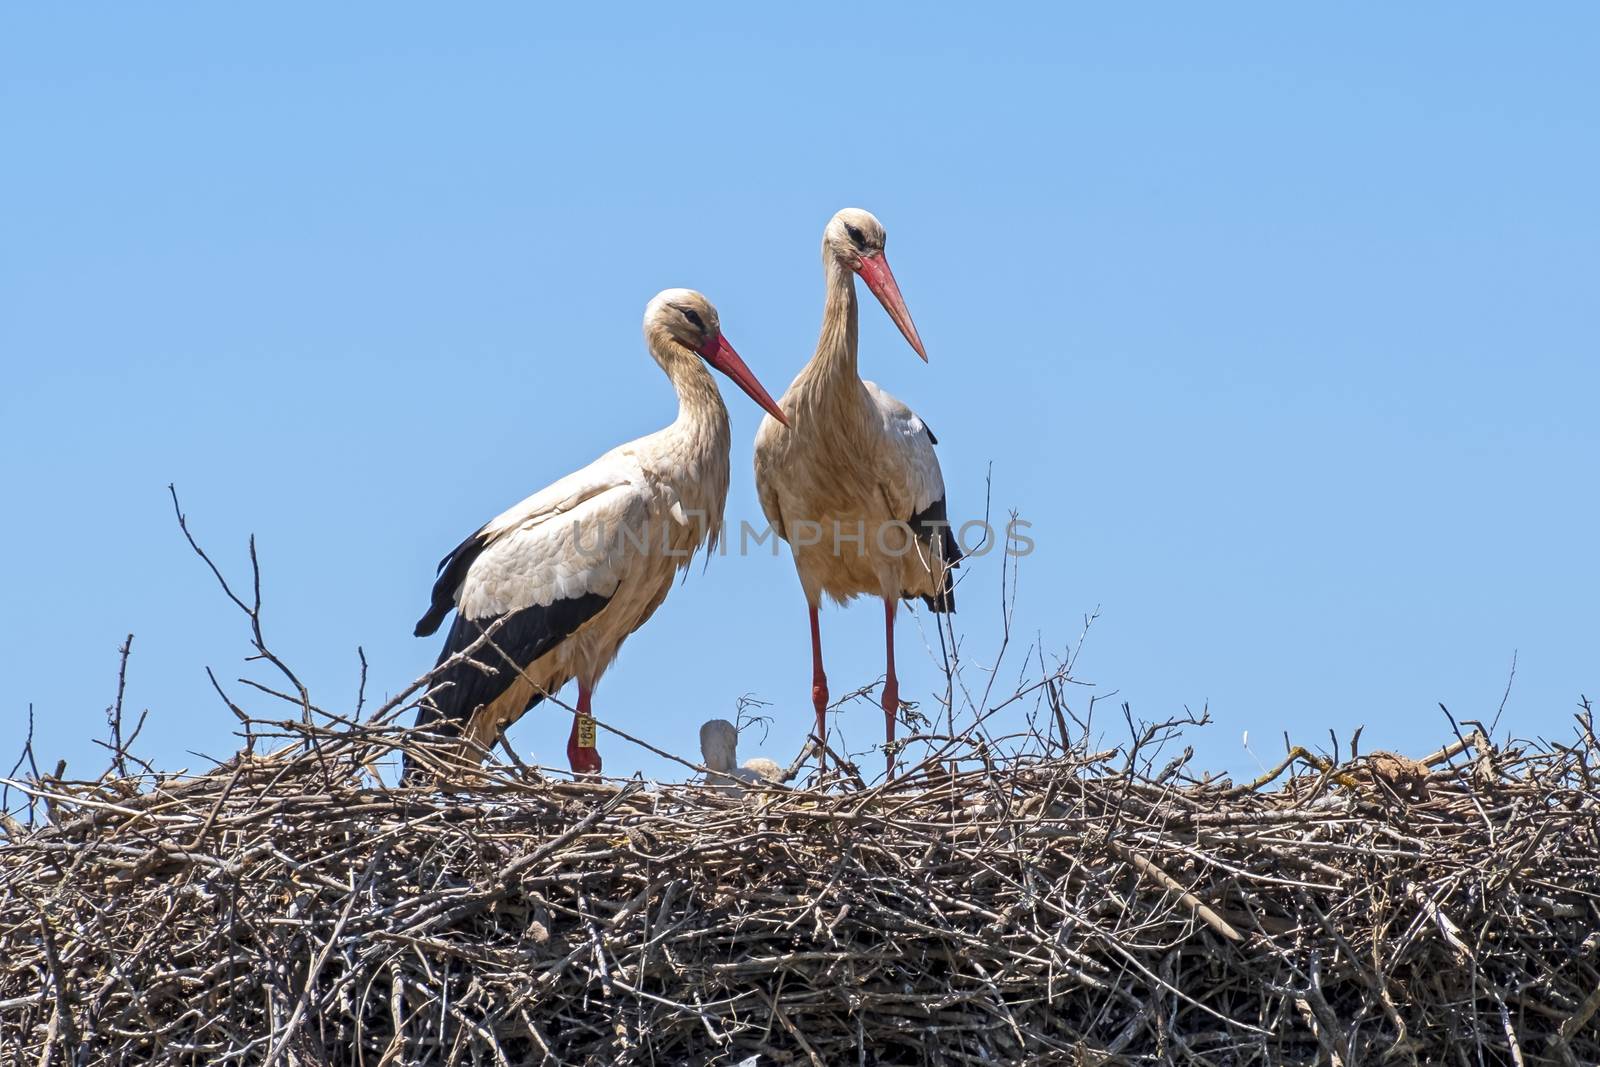 Storks with their babies on the nest in Portugal